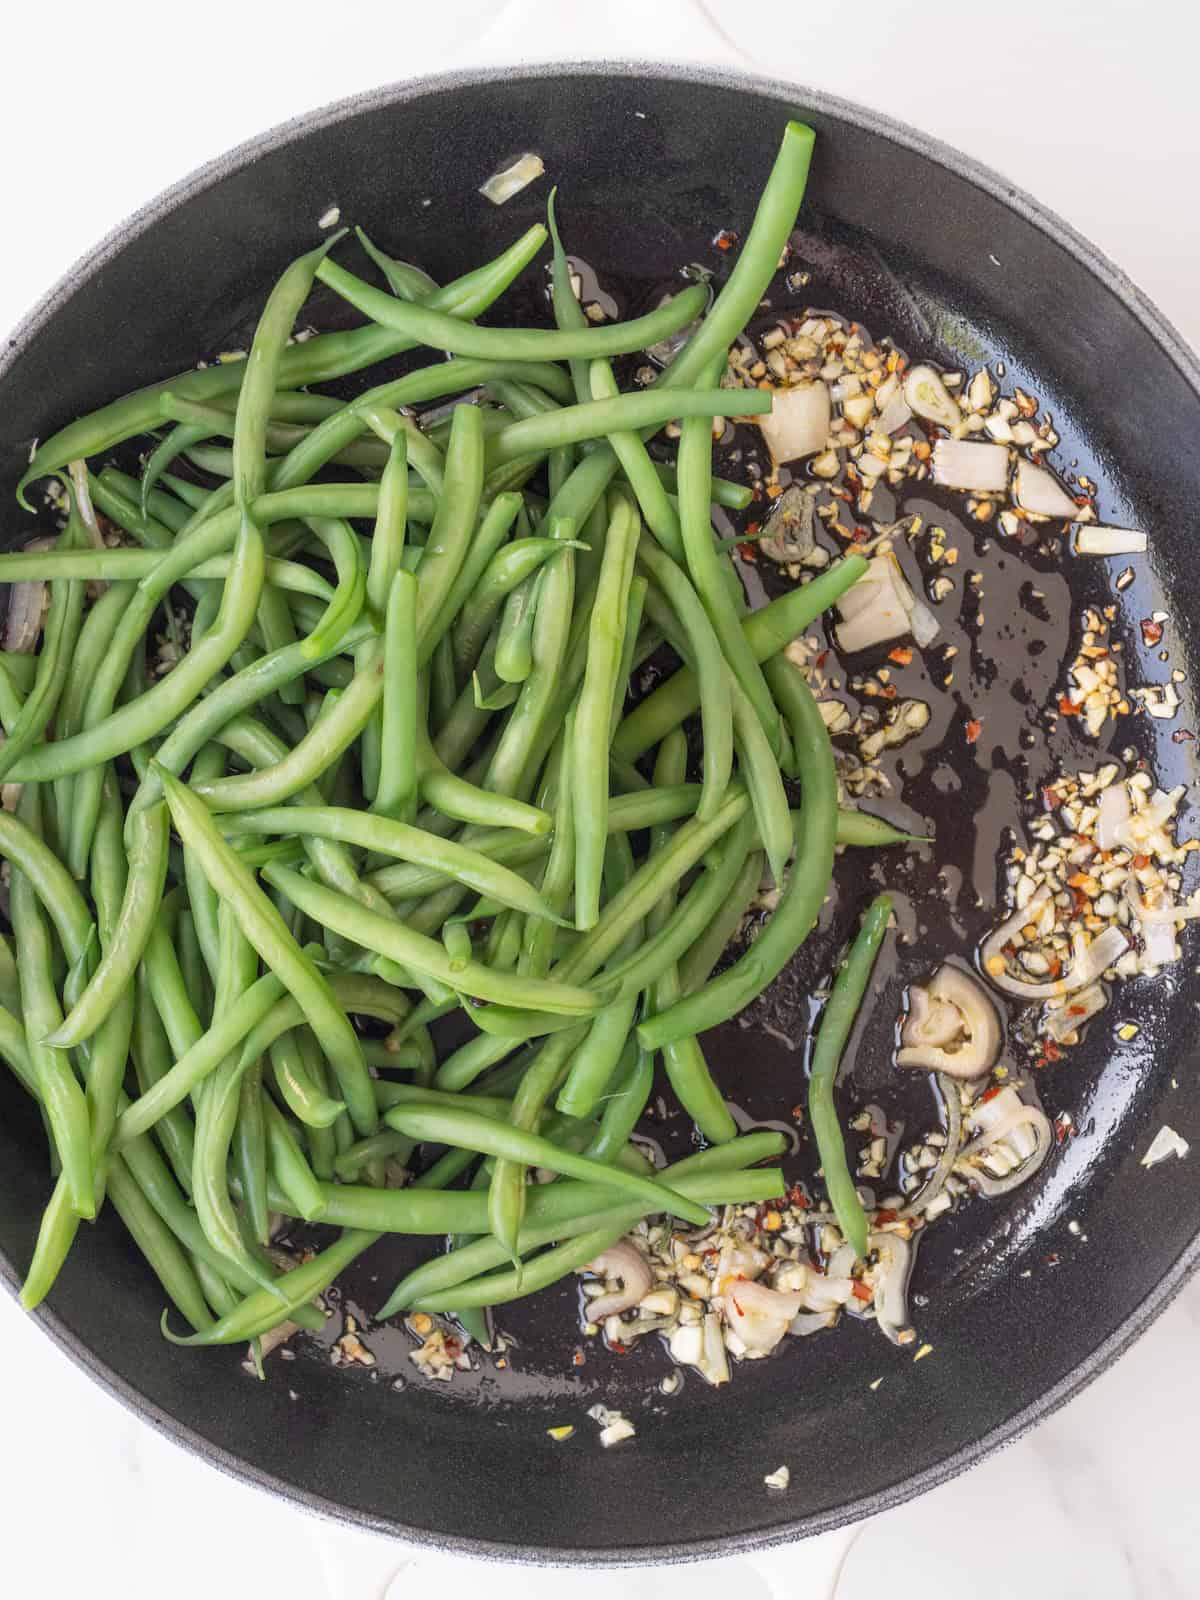 A skillet with sautéed shallots, garlic and red pepper flakes and boiled green beans just added.